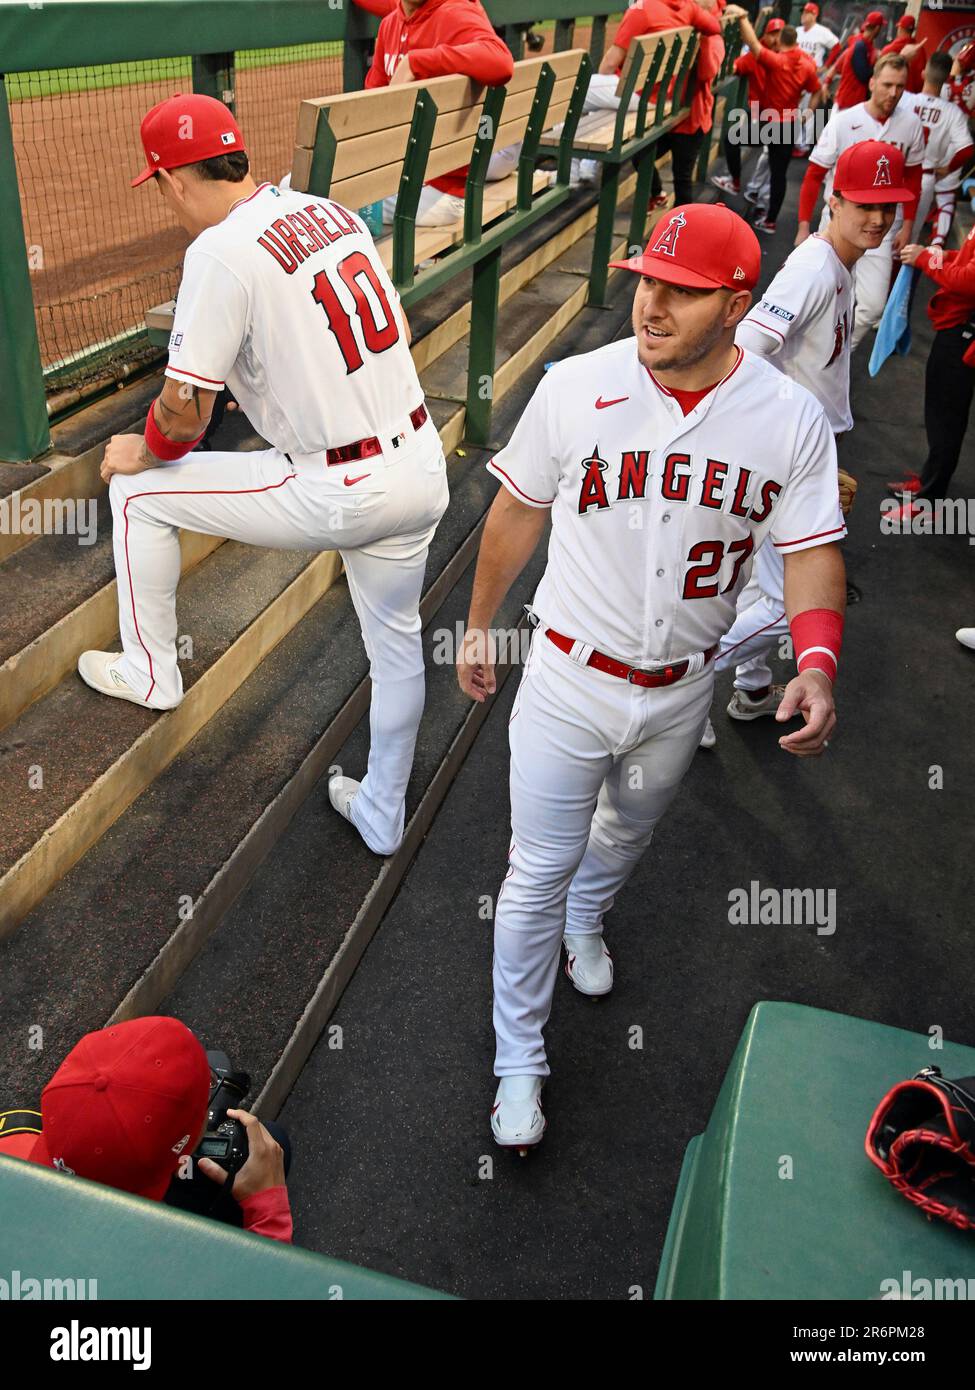 ANAHEIM, CA - JUNE 10: Los Angeles Angels center fielder Mike Trout (27) in  the dugout with his teammates before the start of an MLB baseball game  against the Seattle Mariners played